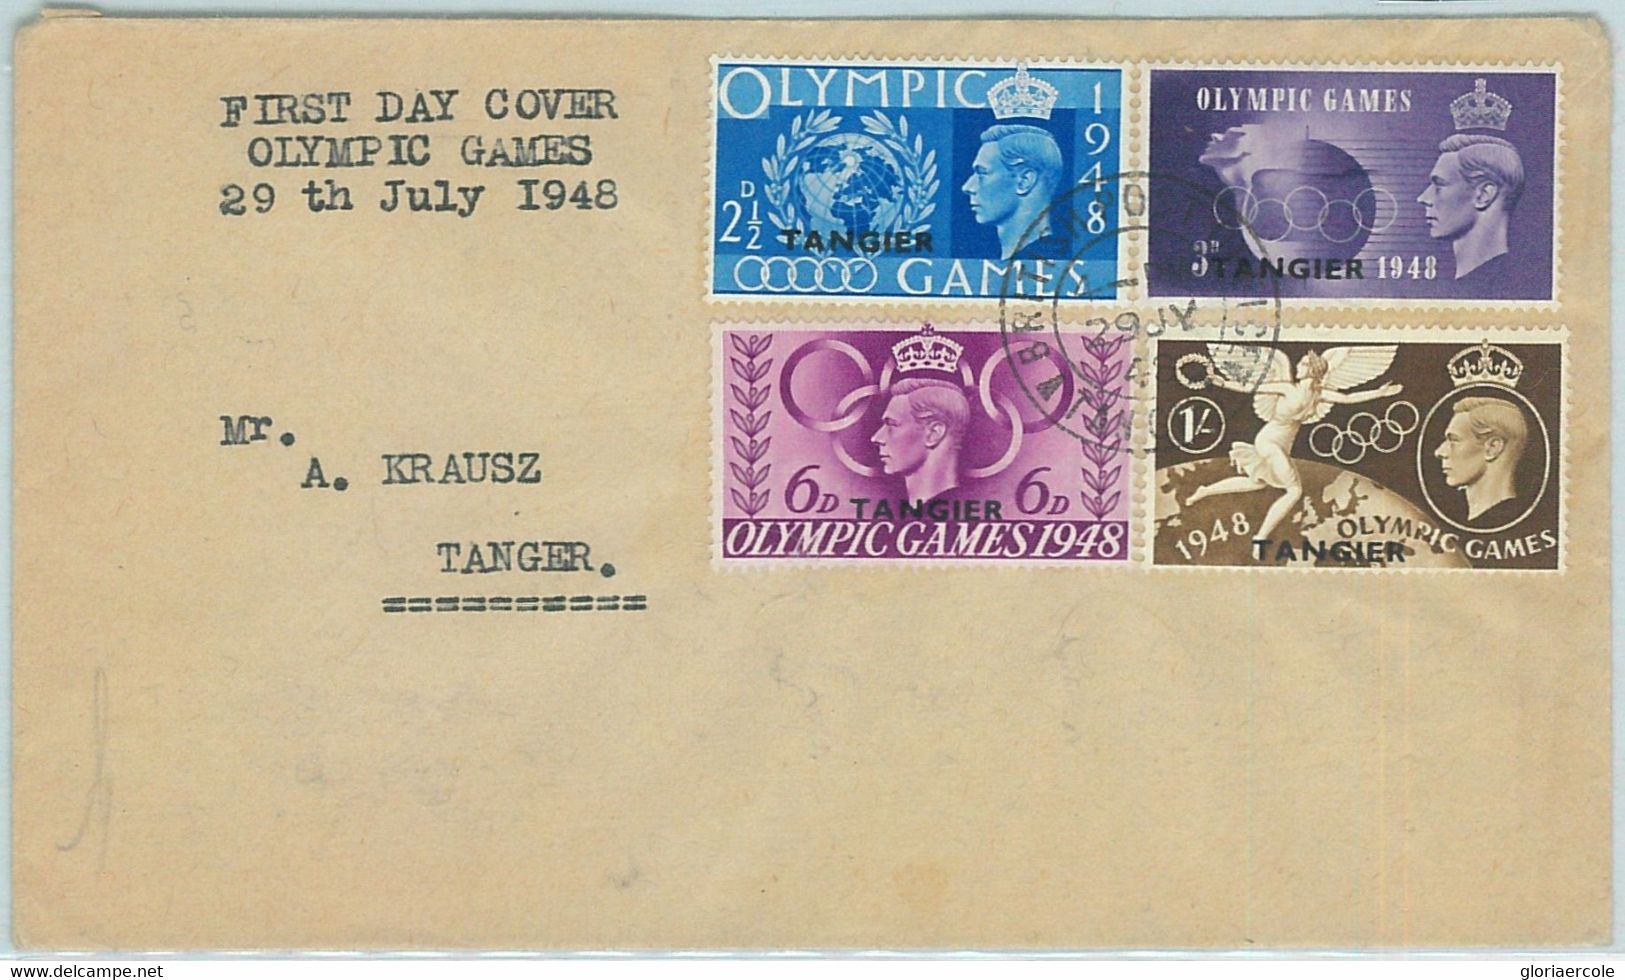 68020 -  TANGIER - POSTAL HISTORY -  1948  Olympic Games  FDC Cover! - Zomer 1948: Londen